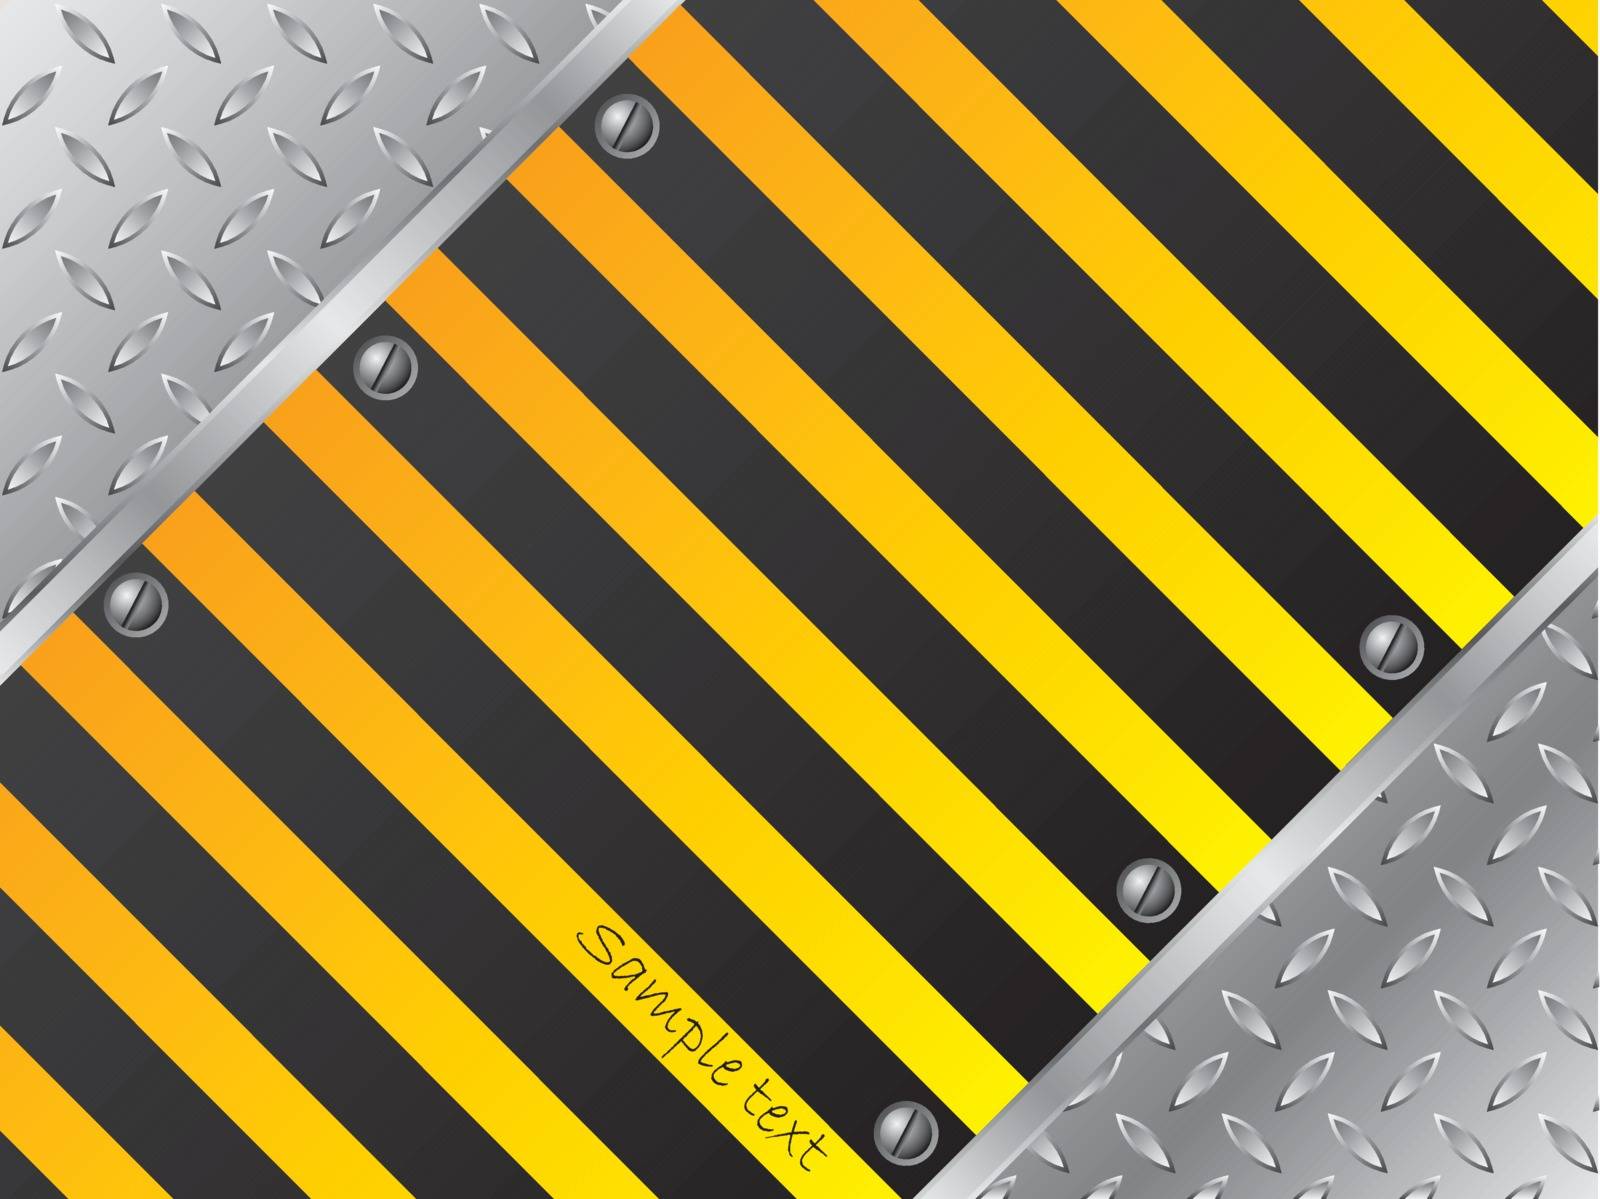 Steel plate background with yellow black stripes and screws